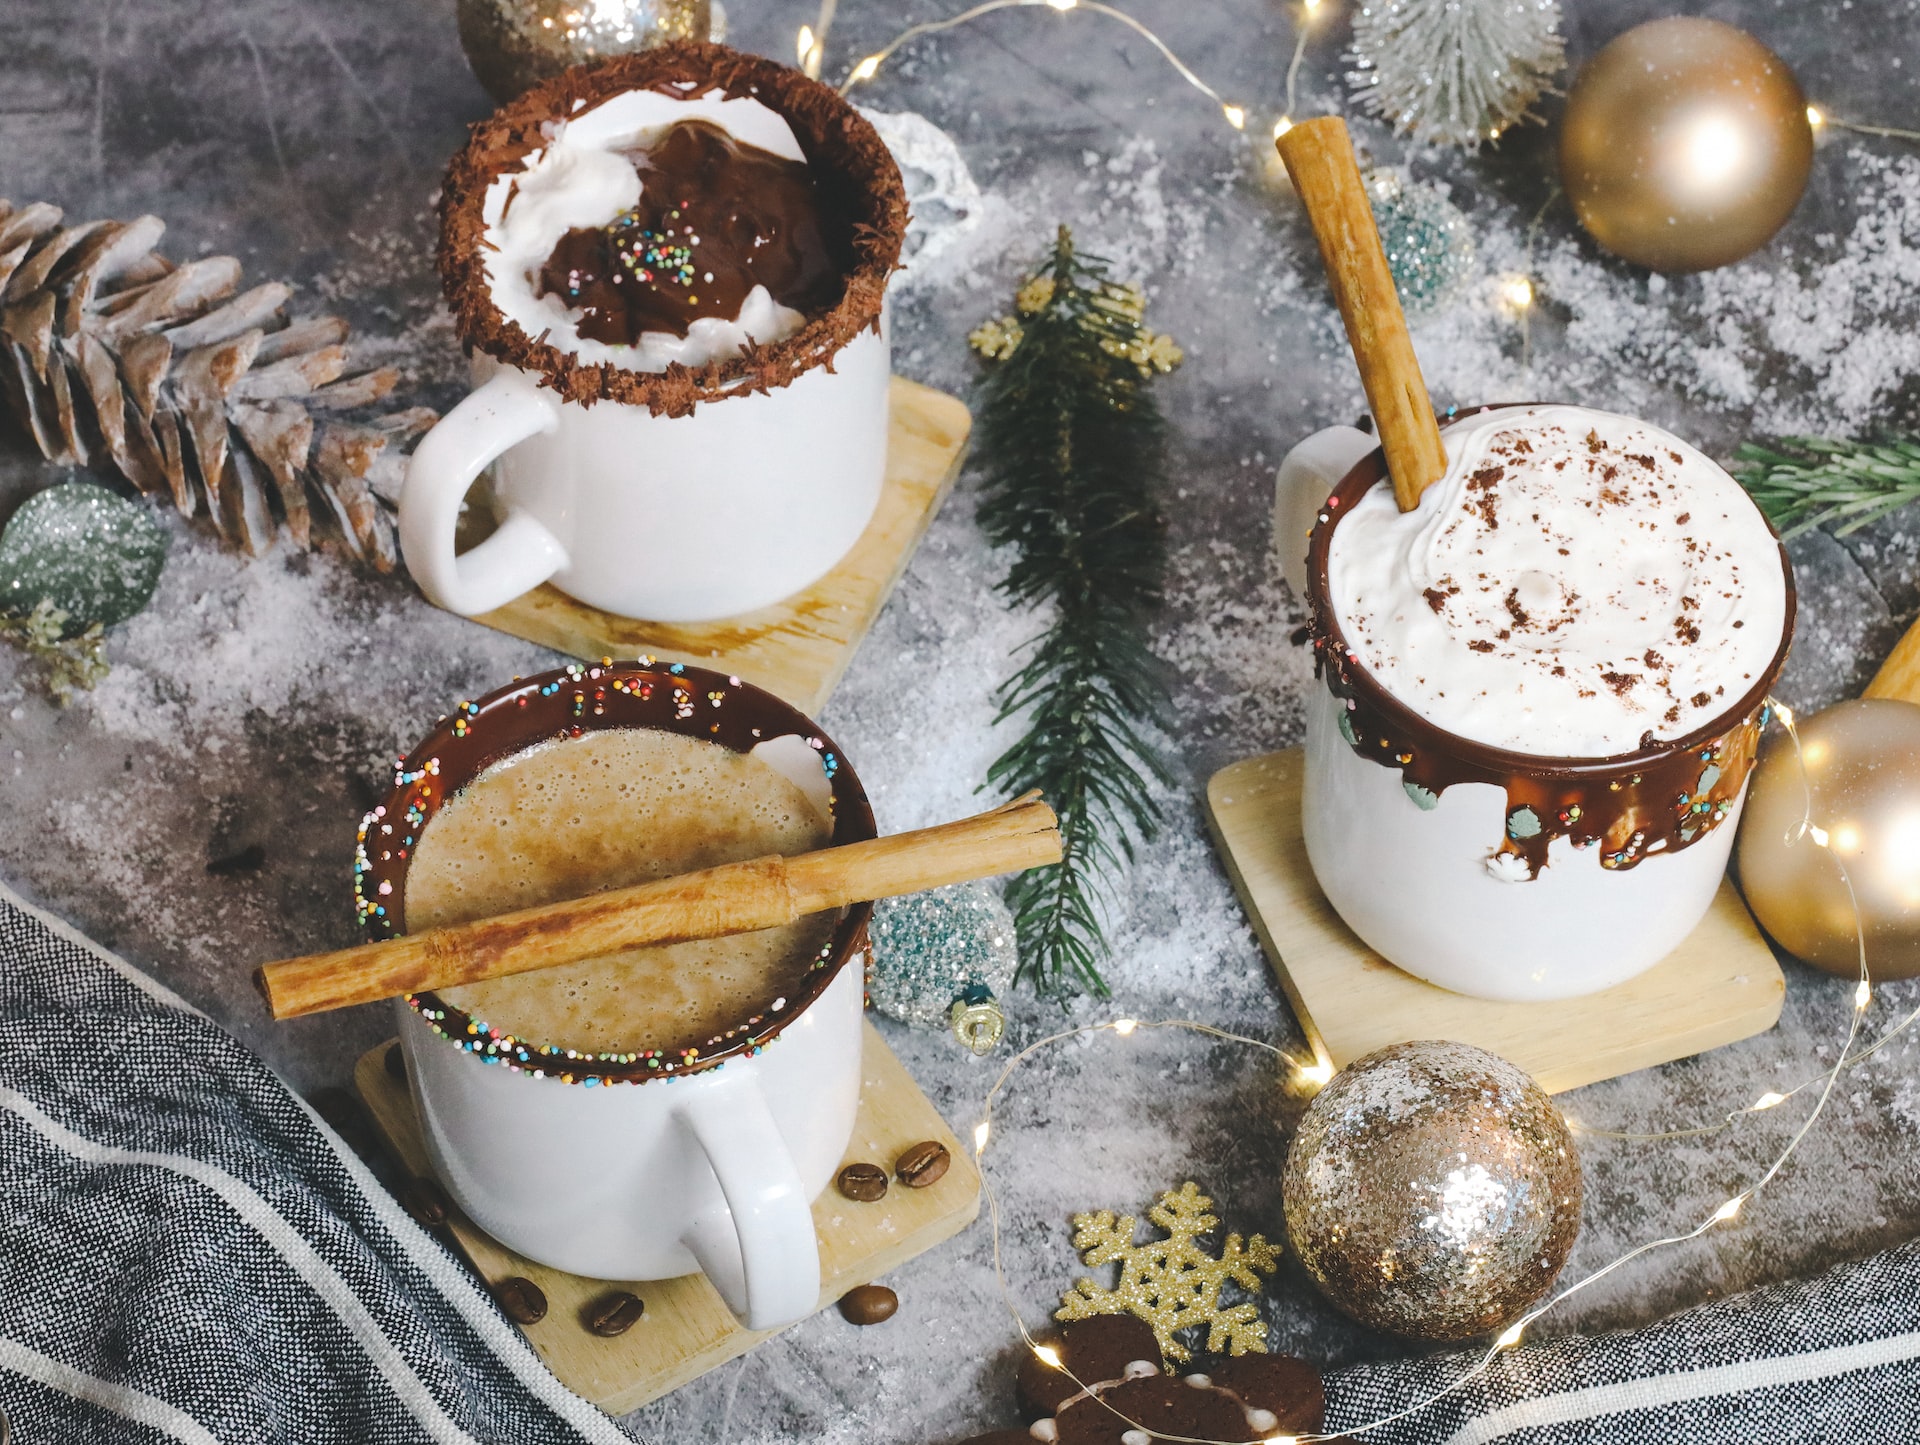 3 mugs of spiked hot chocolate with cinnamon sticks surrounded by ornaments.